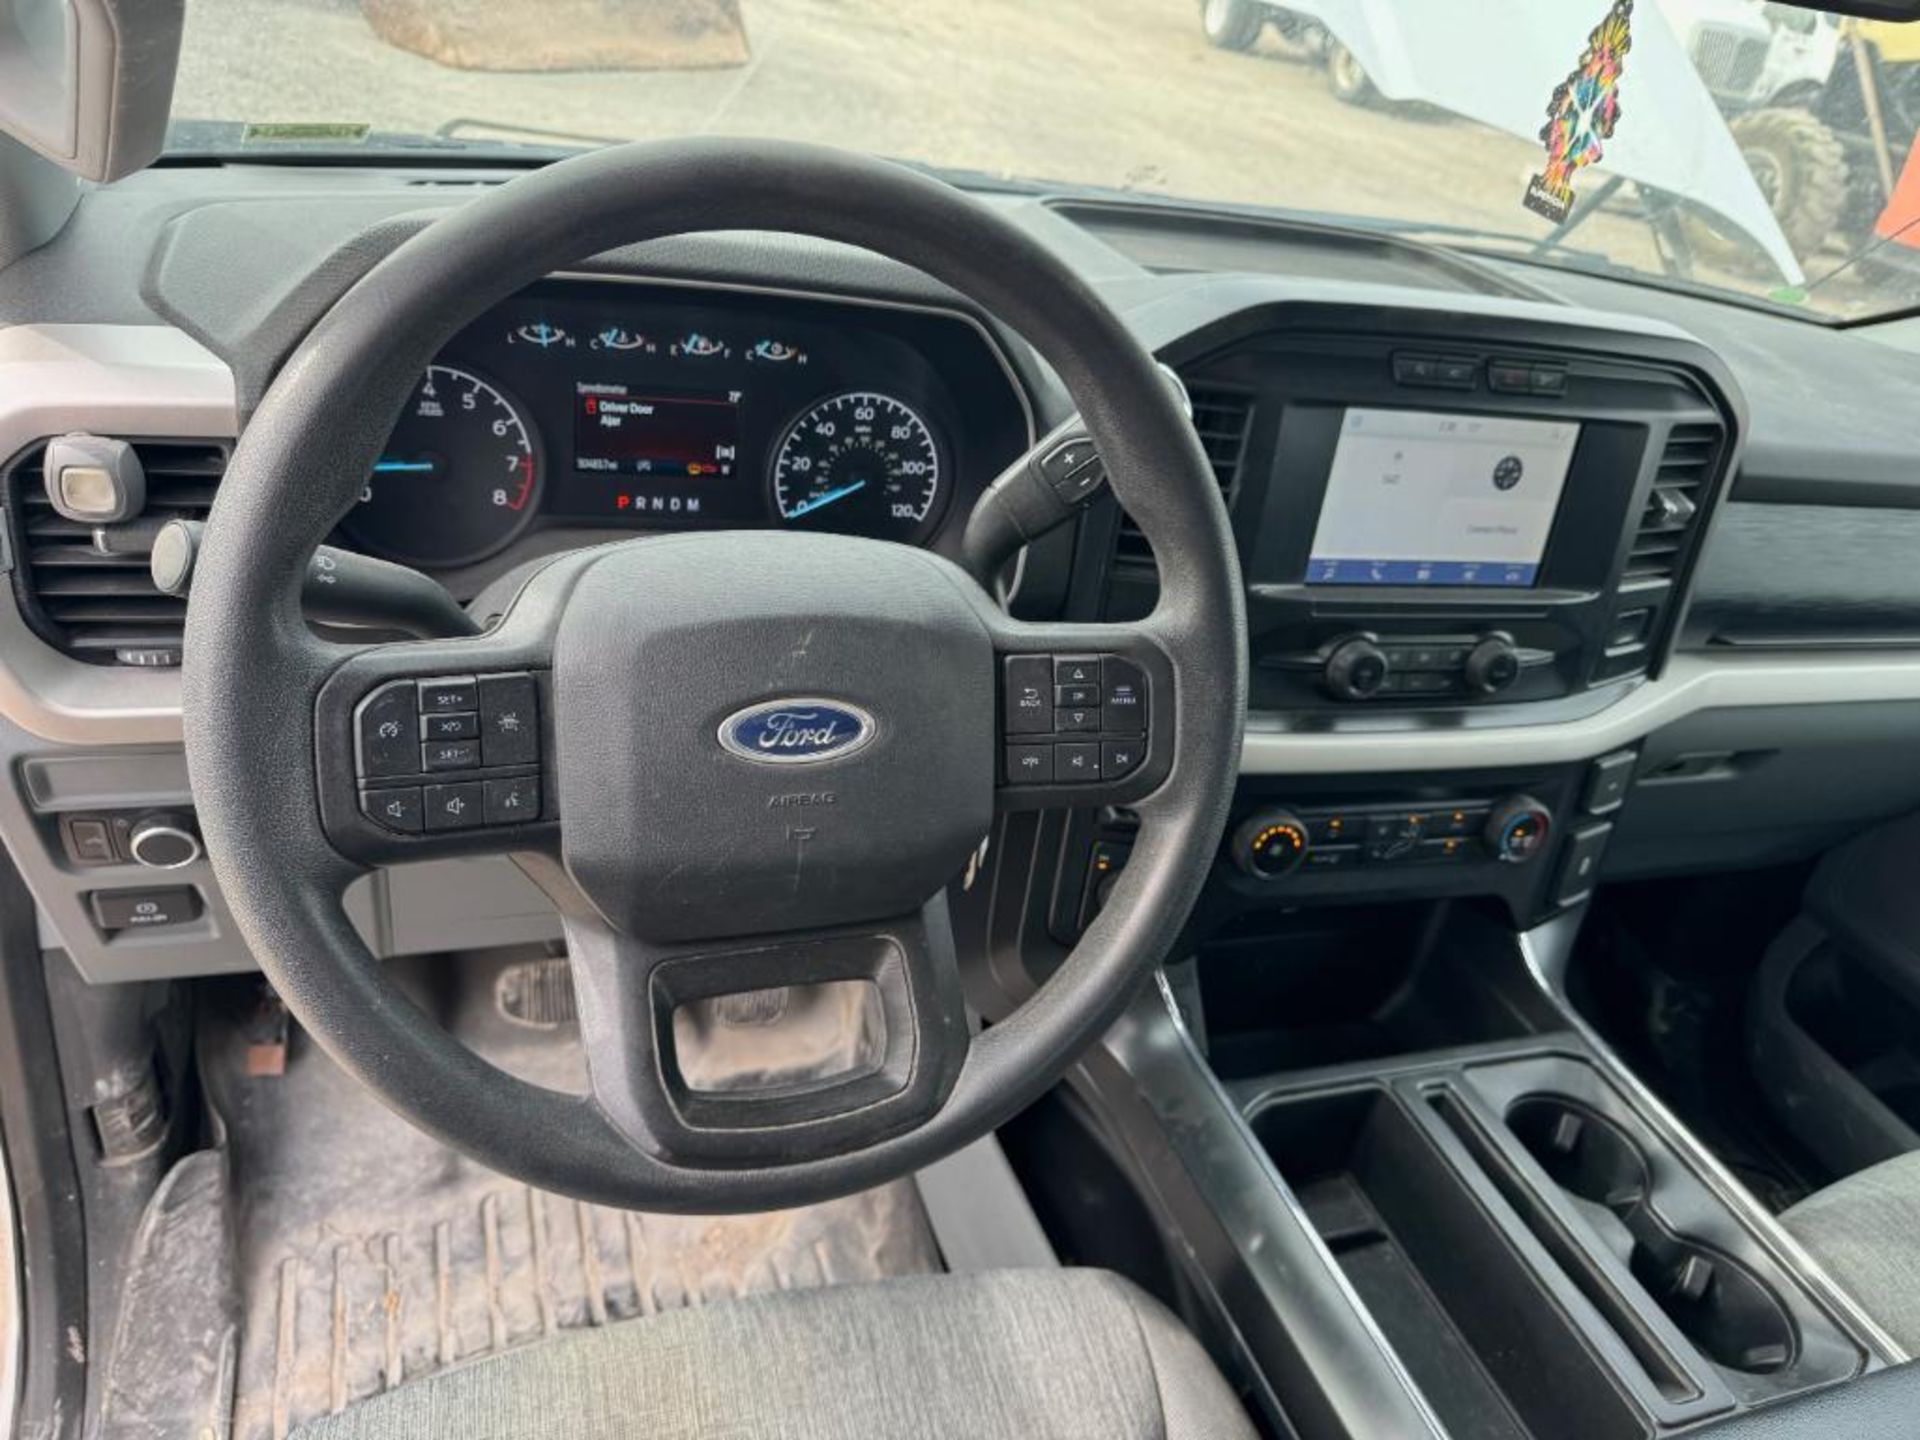 2021 Ford F150 XL Crew Cab 4X4 Truck - Image 13 of 19